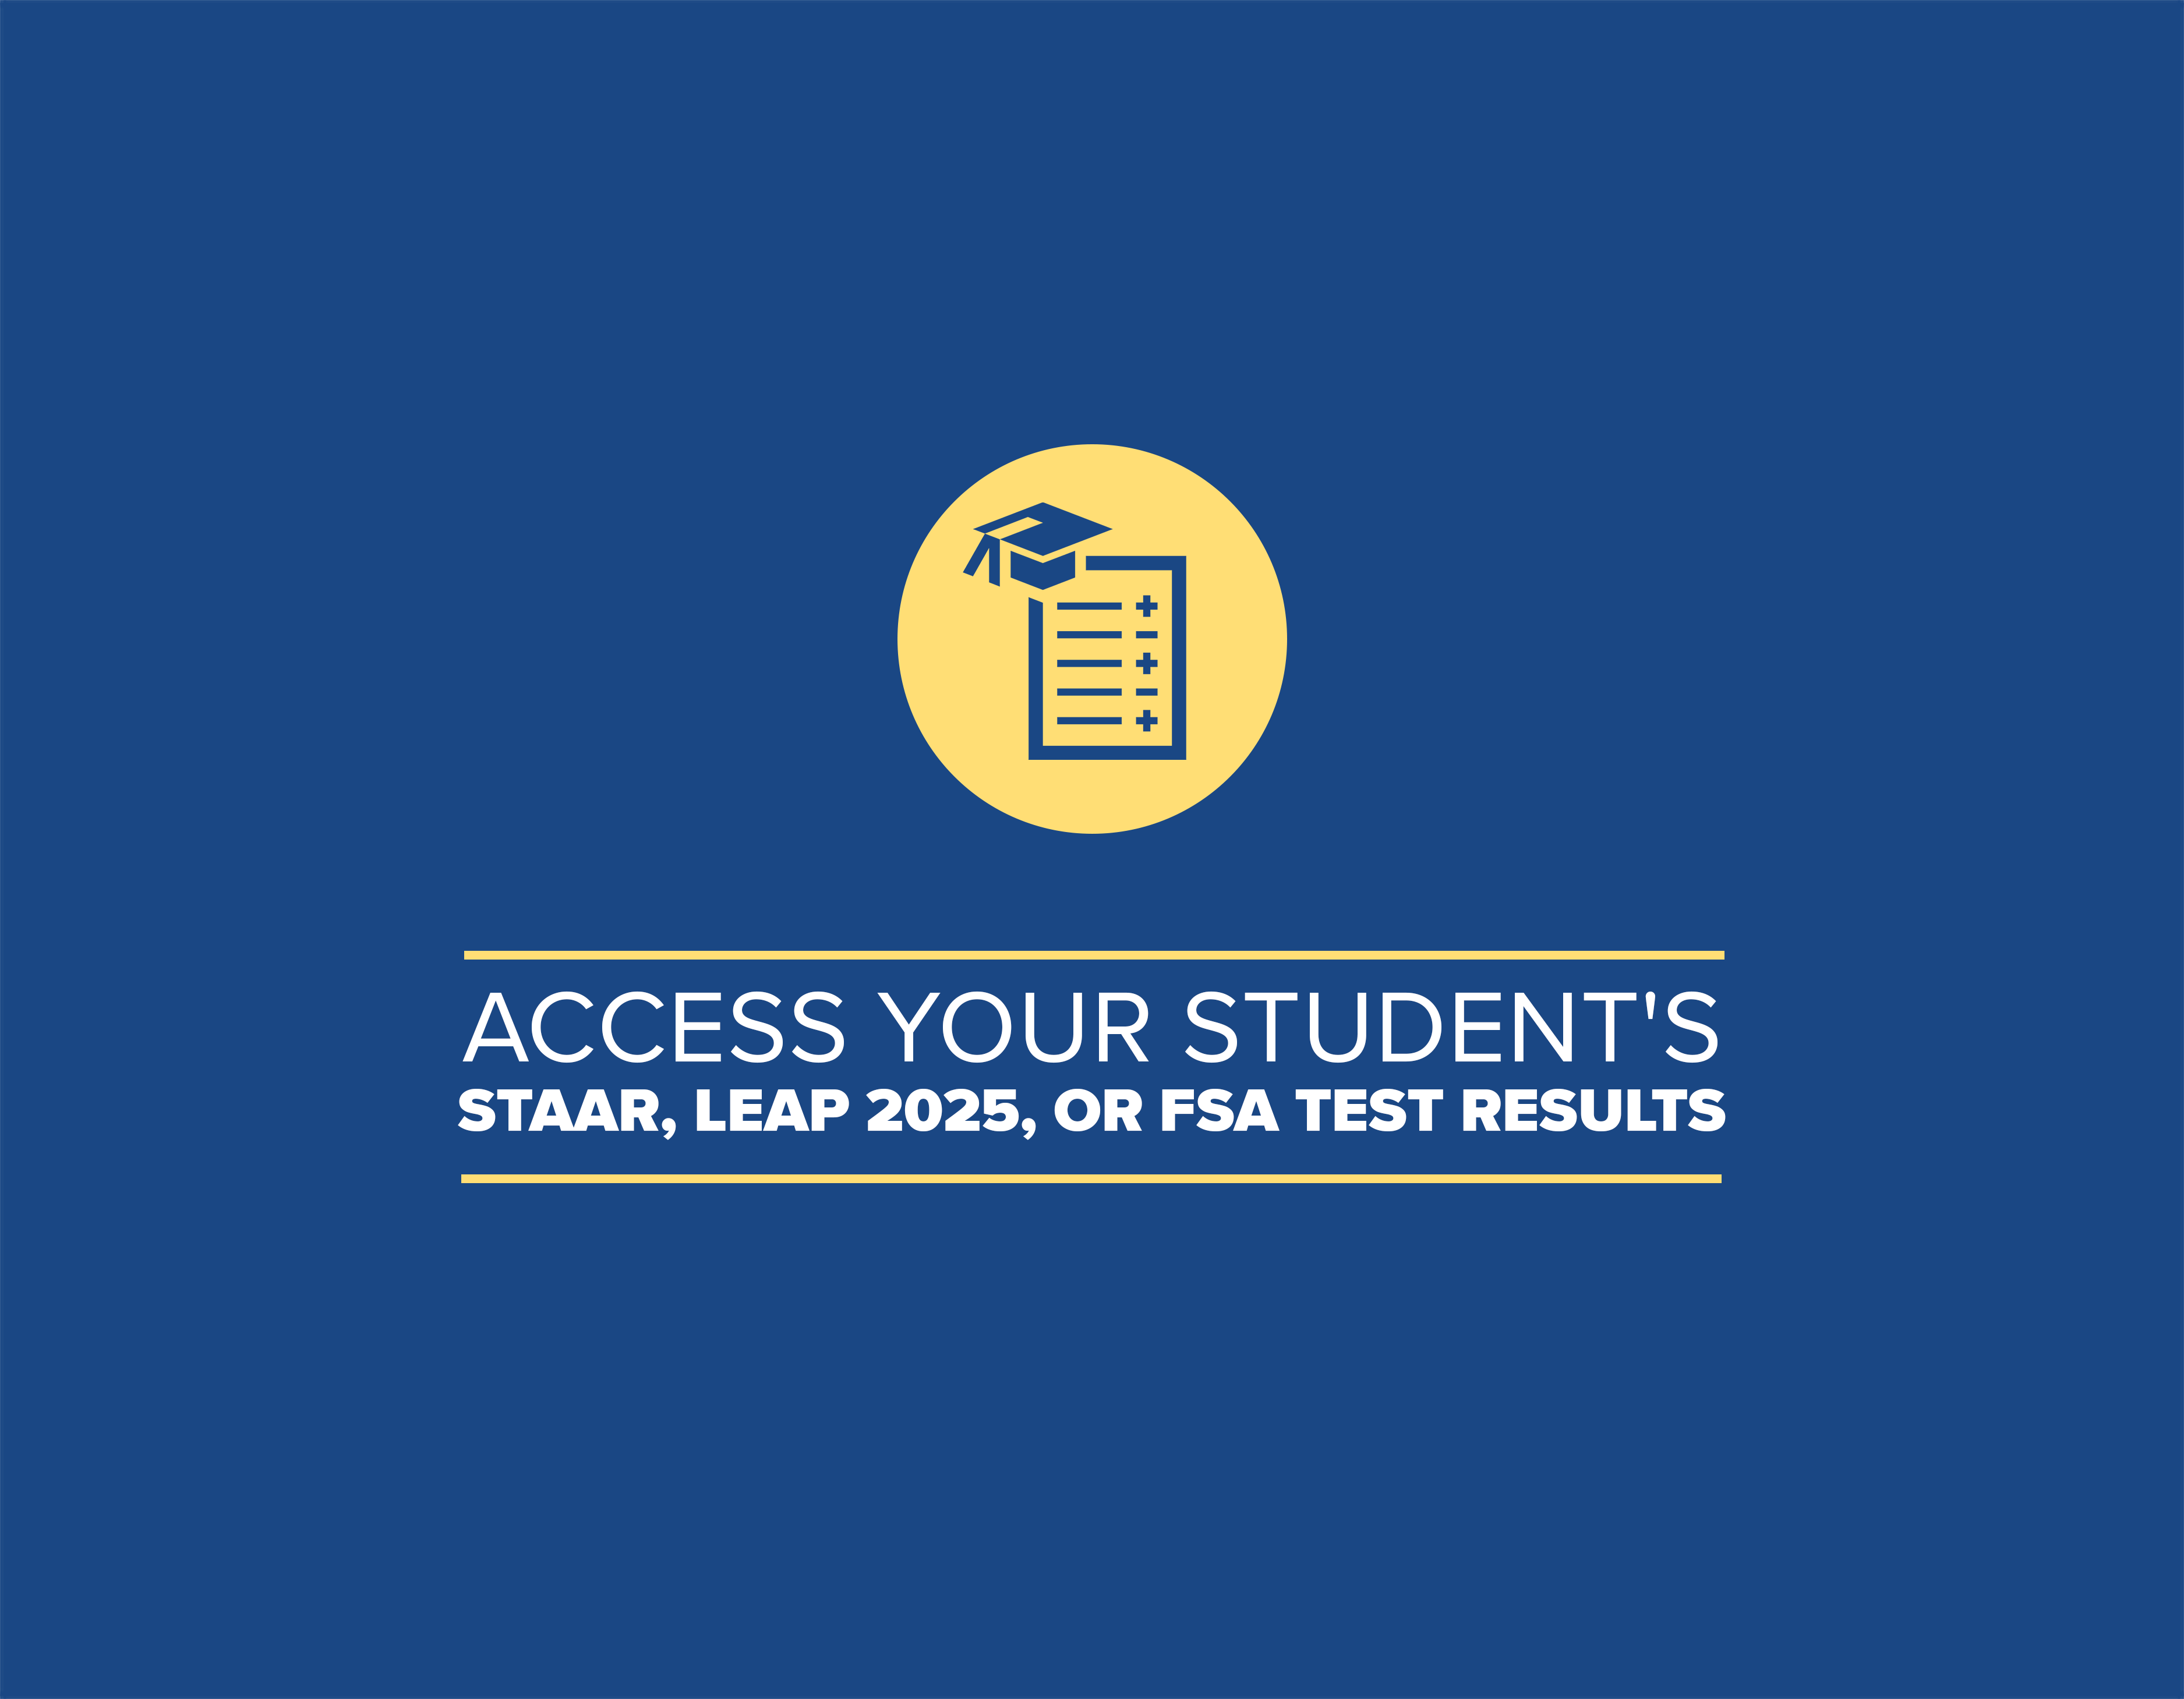 How to Access Your Student’s STAAR, LEAP 2025, or FSA Test Results